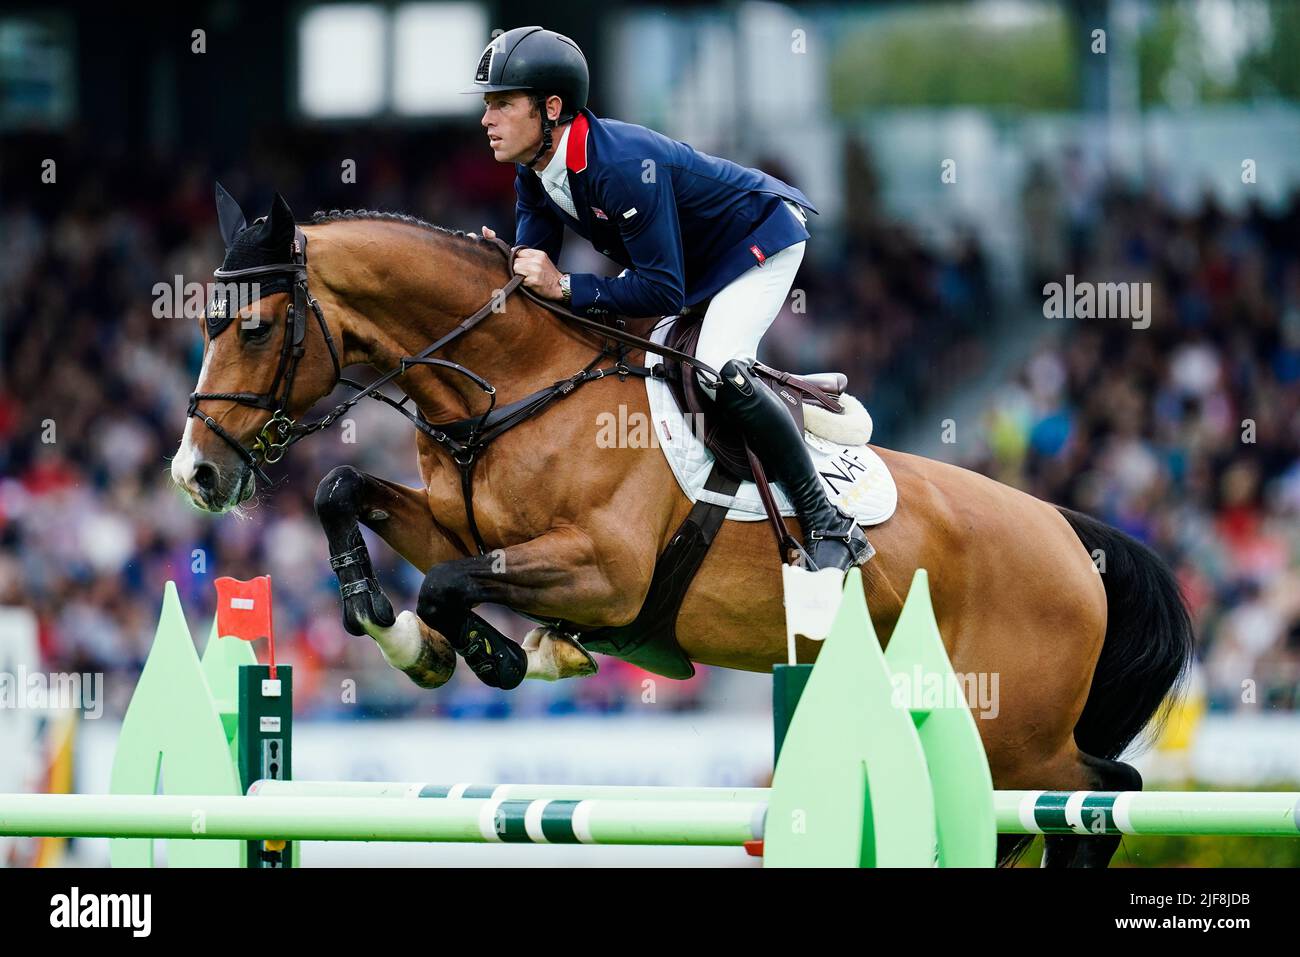 Aachen, Germany. 30th June, 2022. Equestrian sport, jumping CHIO, Nations Cup